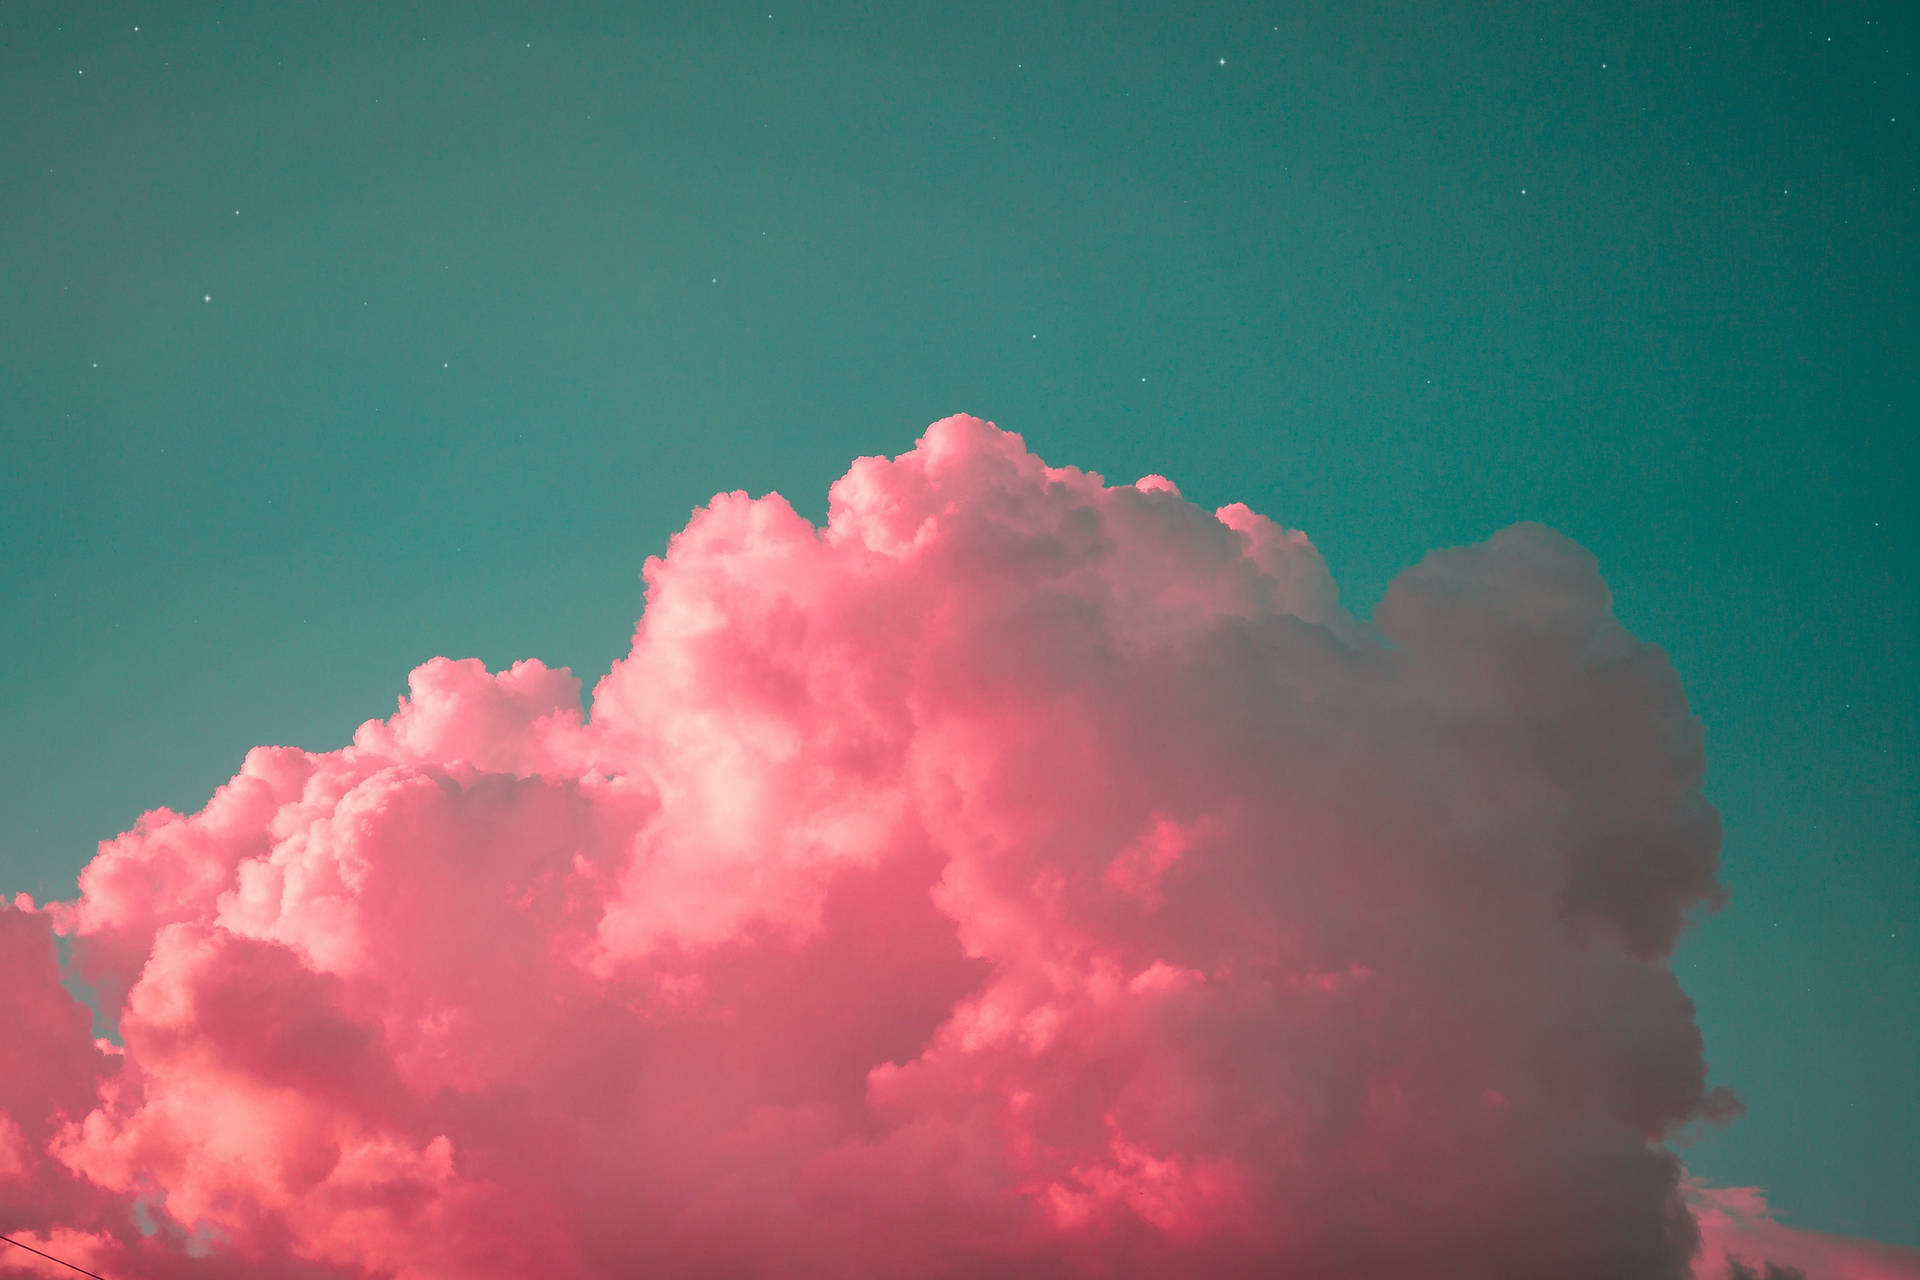 Caption: Serene Pink Clouds At Twilight Wallpaper